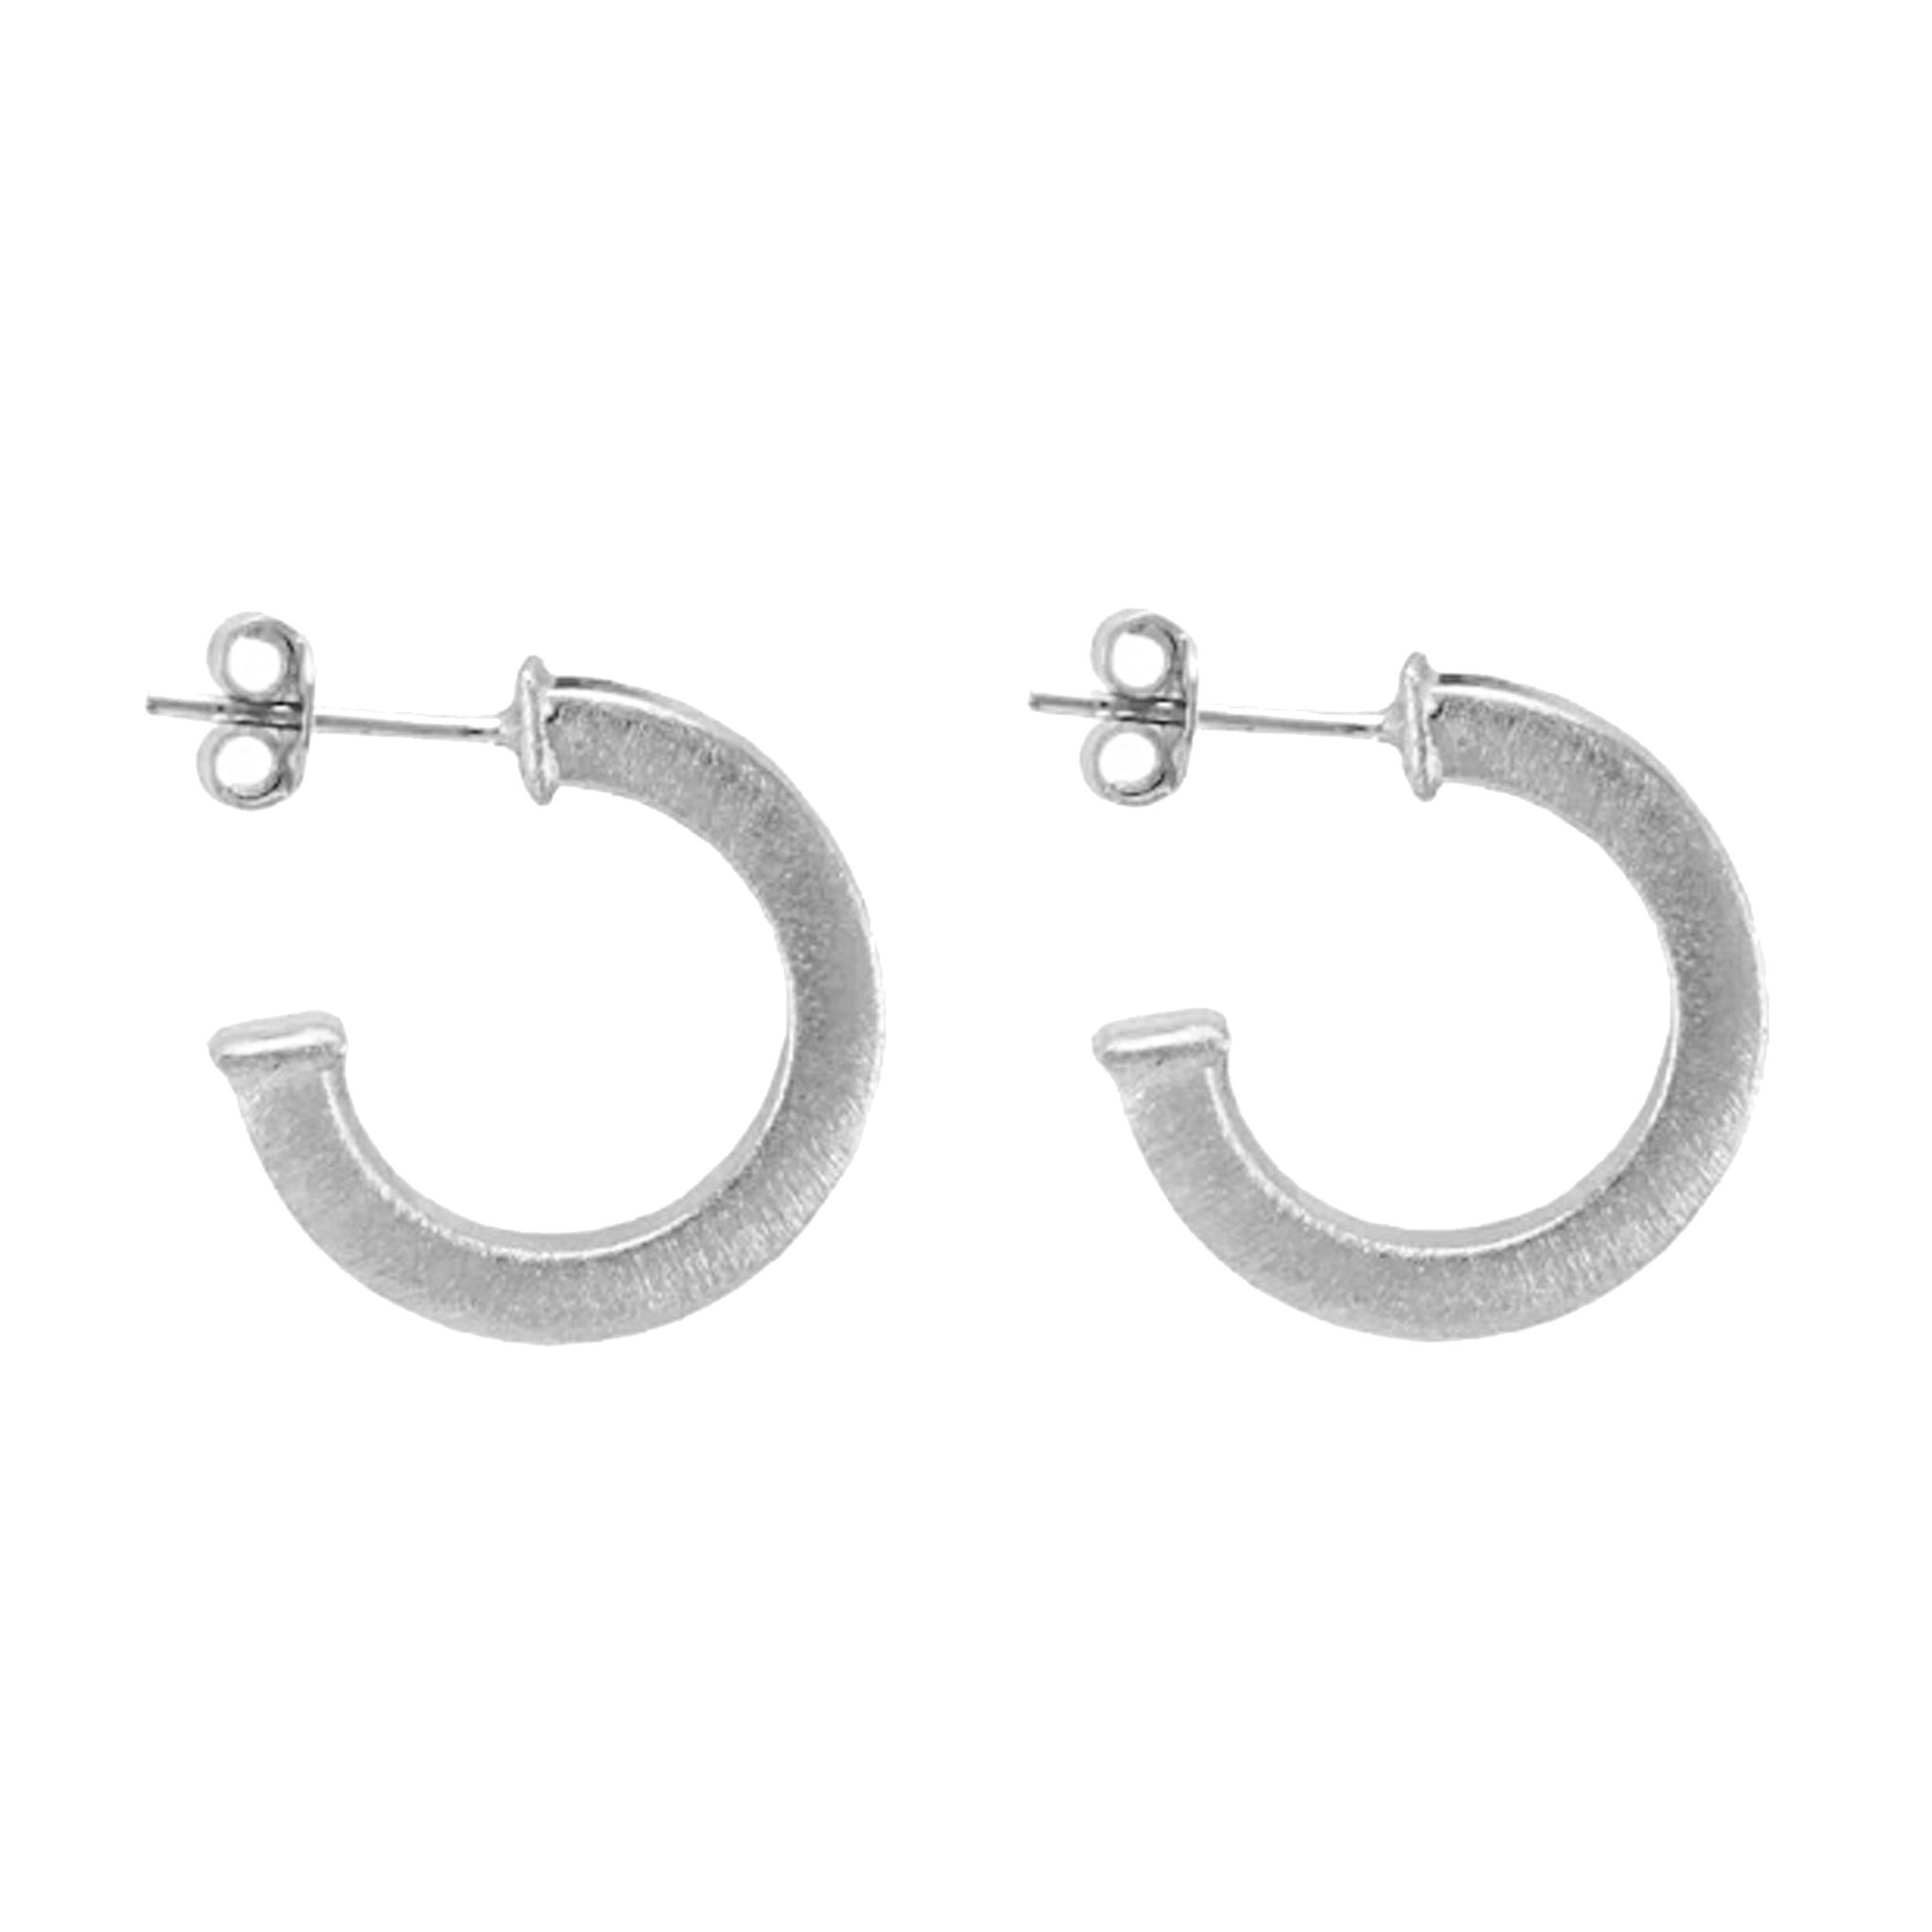 Sheila Fajl Bianca Petite Square Styled Hoop Earrings in Brushed Silver Plated